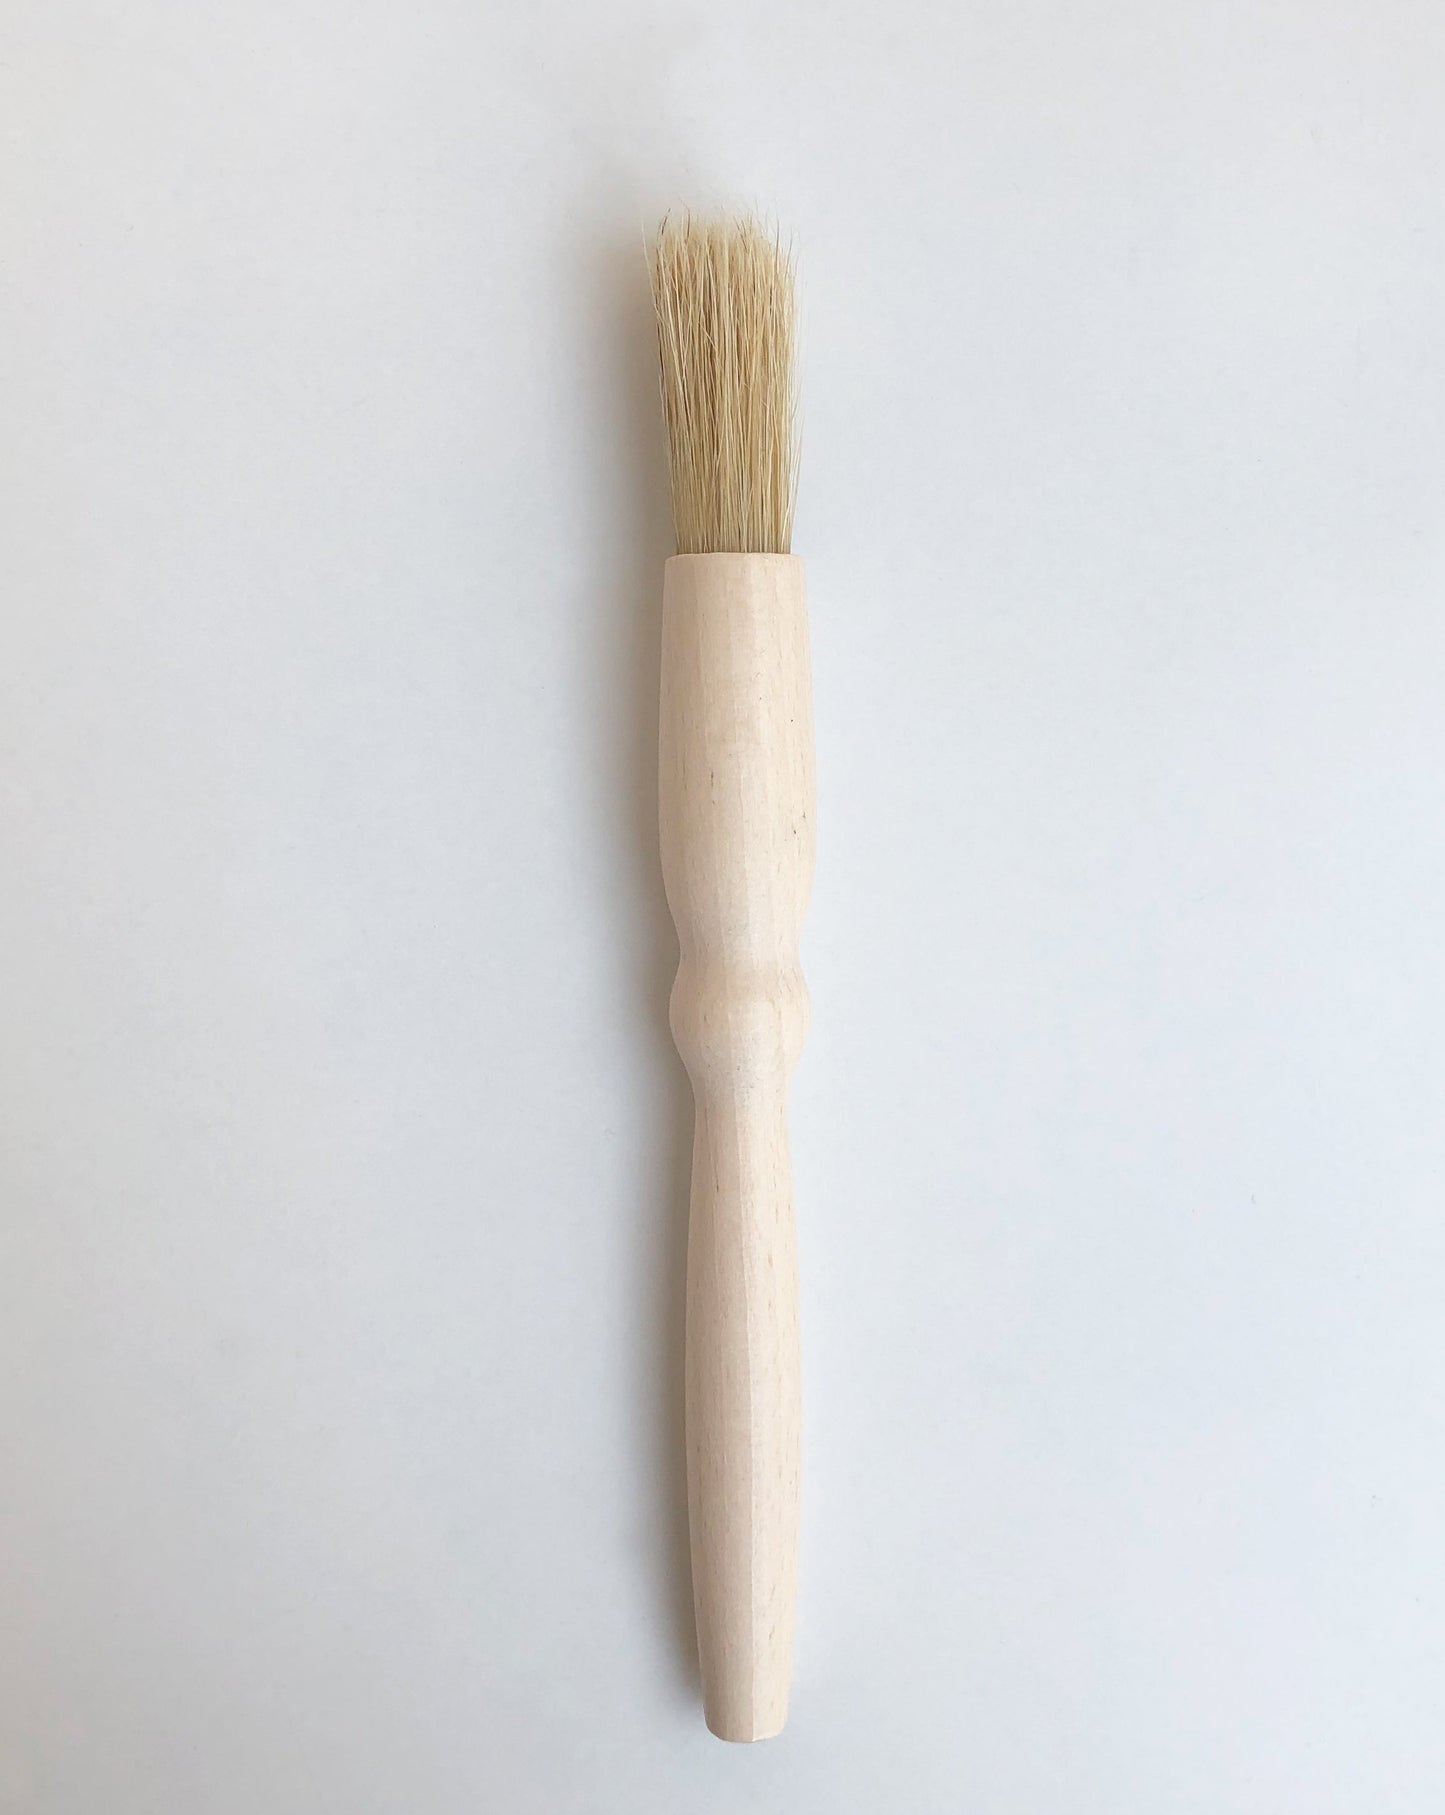 All natural brush is great for cleaning dusty sewing areas, especially around and on a sewing maschine.